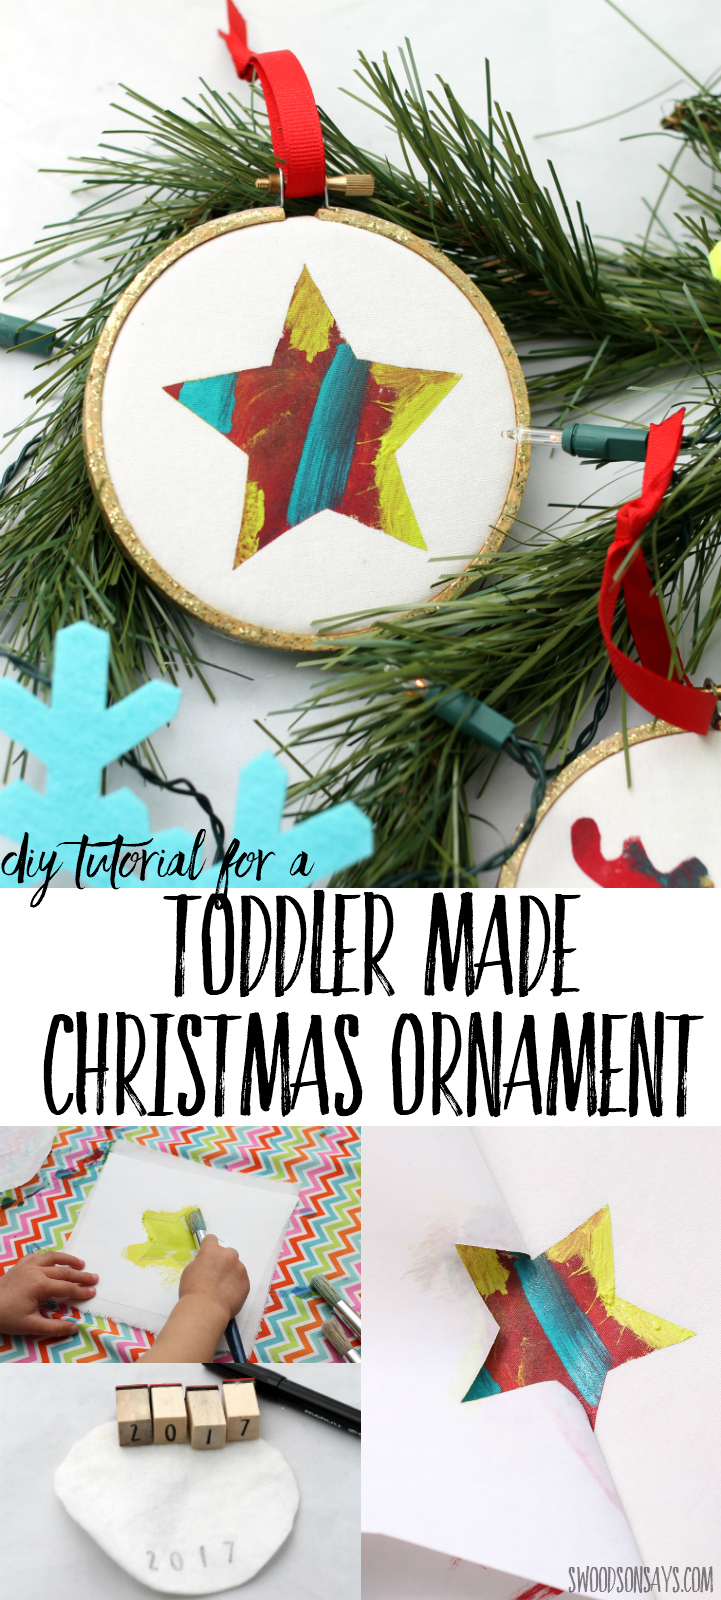 Check out this easy tutorial for a Christmas ornament that kids can make! Babies up through big kids can help paint a festive shape, which hangs from a simple embroidery hoop. Christmas craft and diy Christmas gift all in one! #kidmadeornament #diychristmasornament